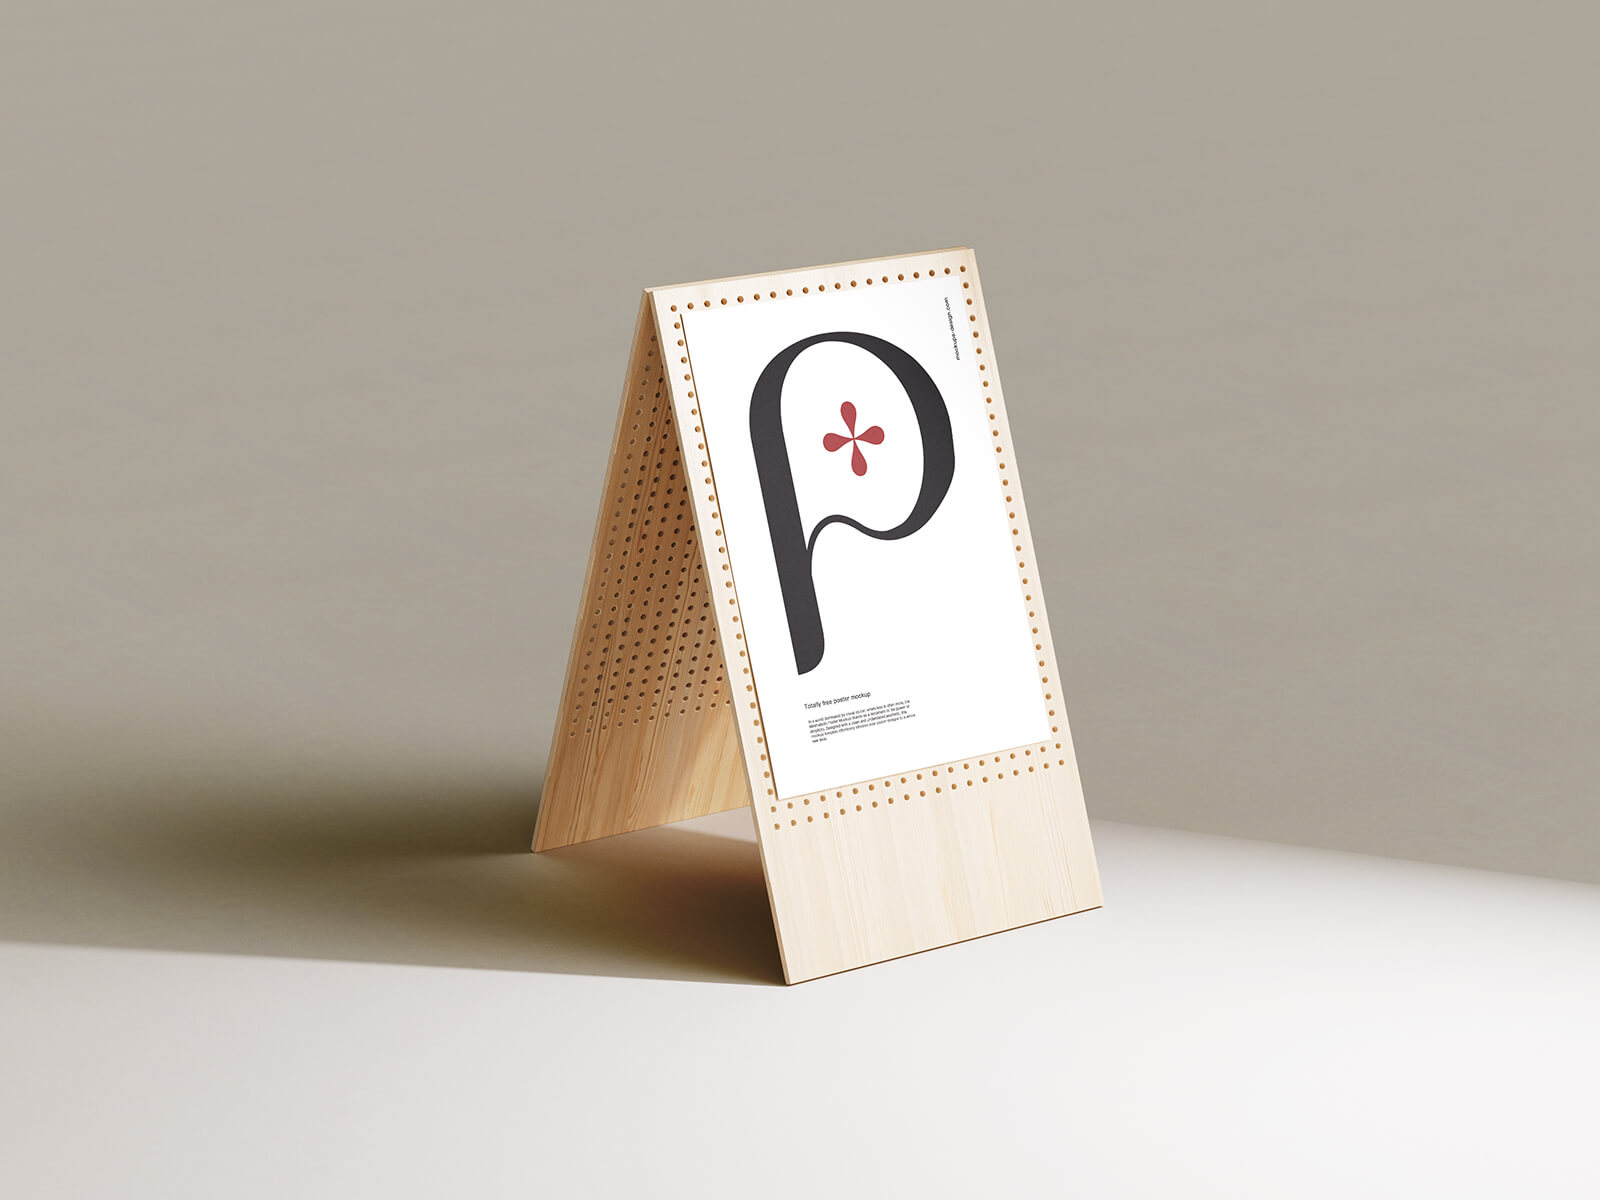 Free Beautiful Wooden A-Stand Poster Mockup PSD